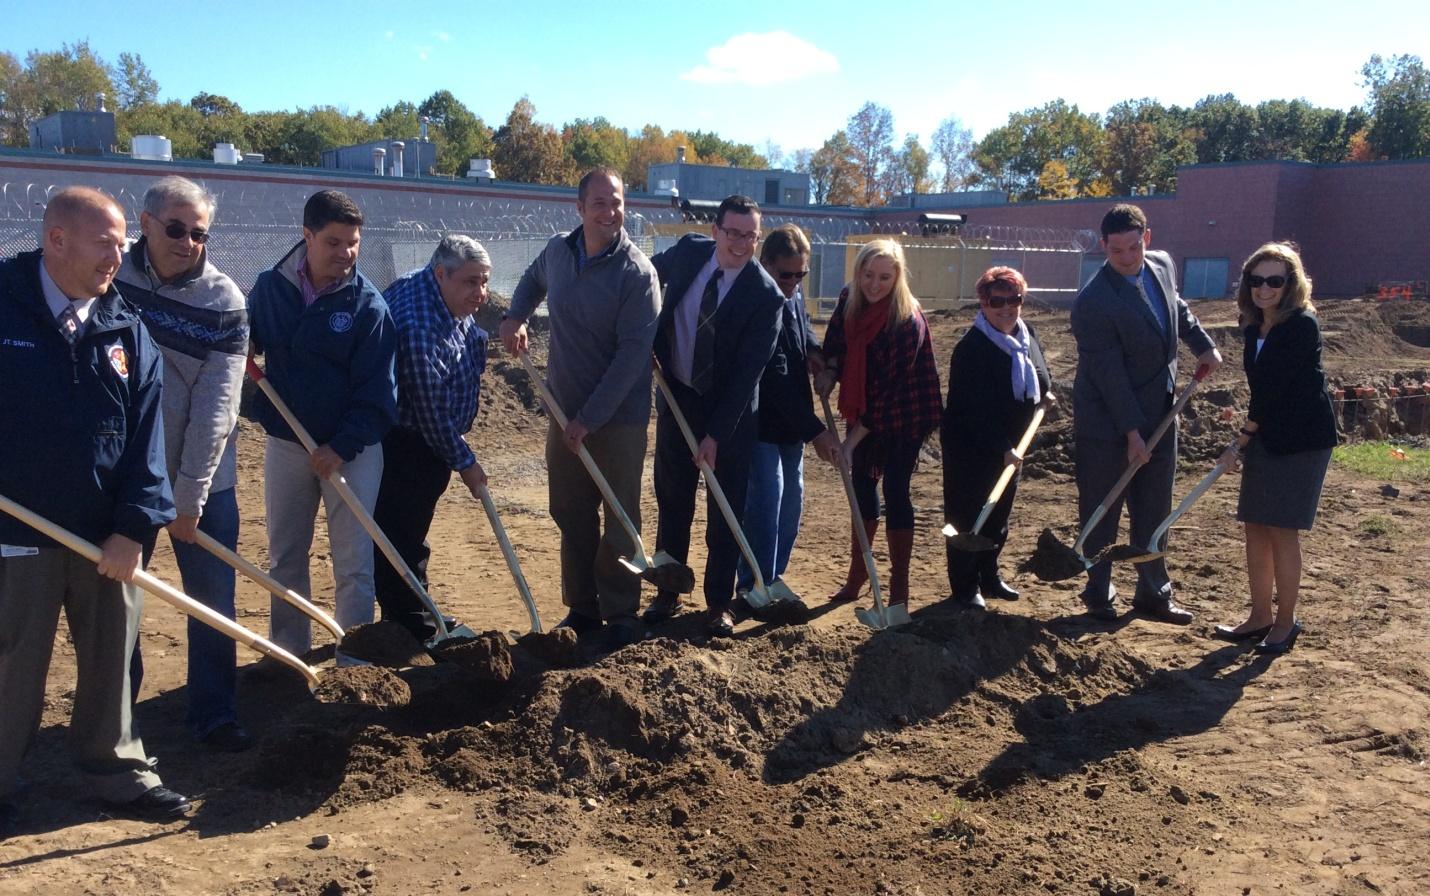 Montgomery County Officials and other distinguished guests breaking ground on the expansion at the Public Safety facility